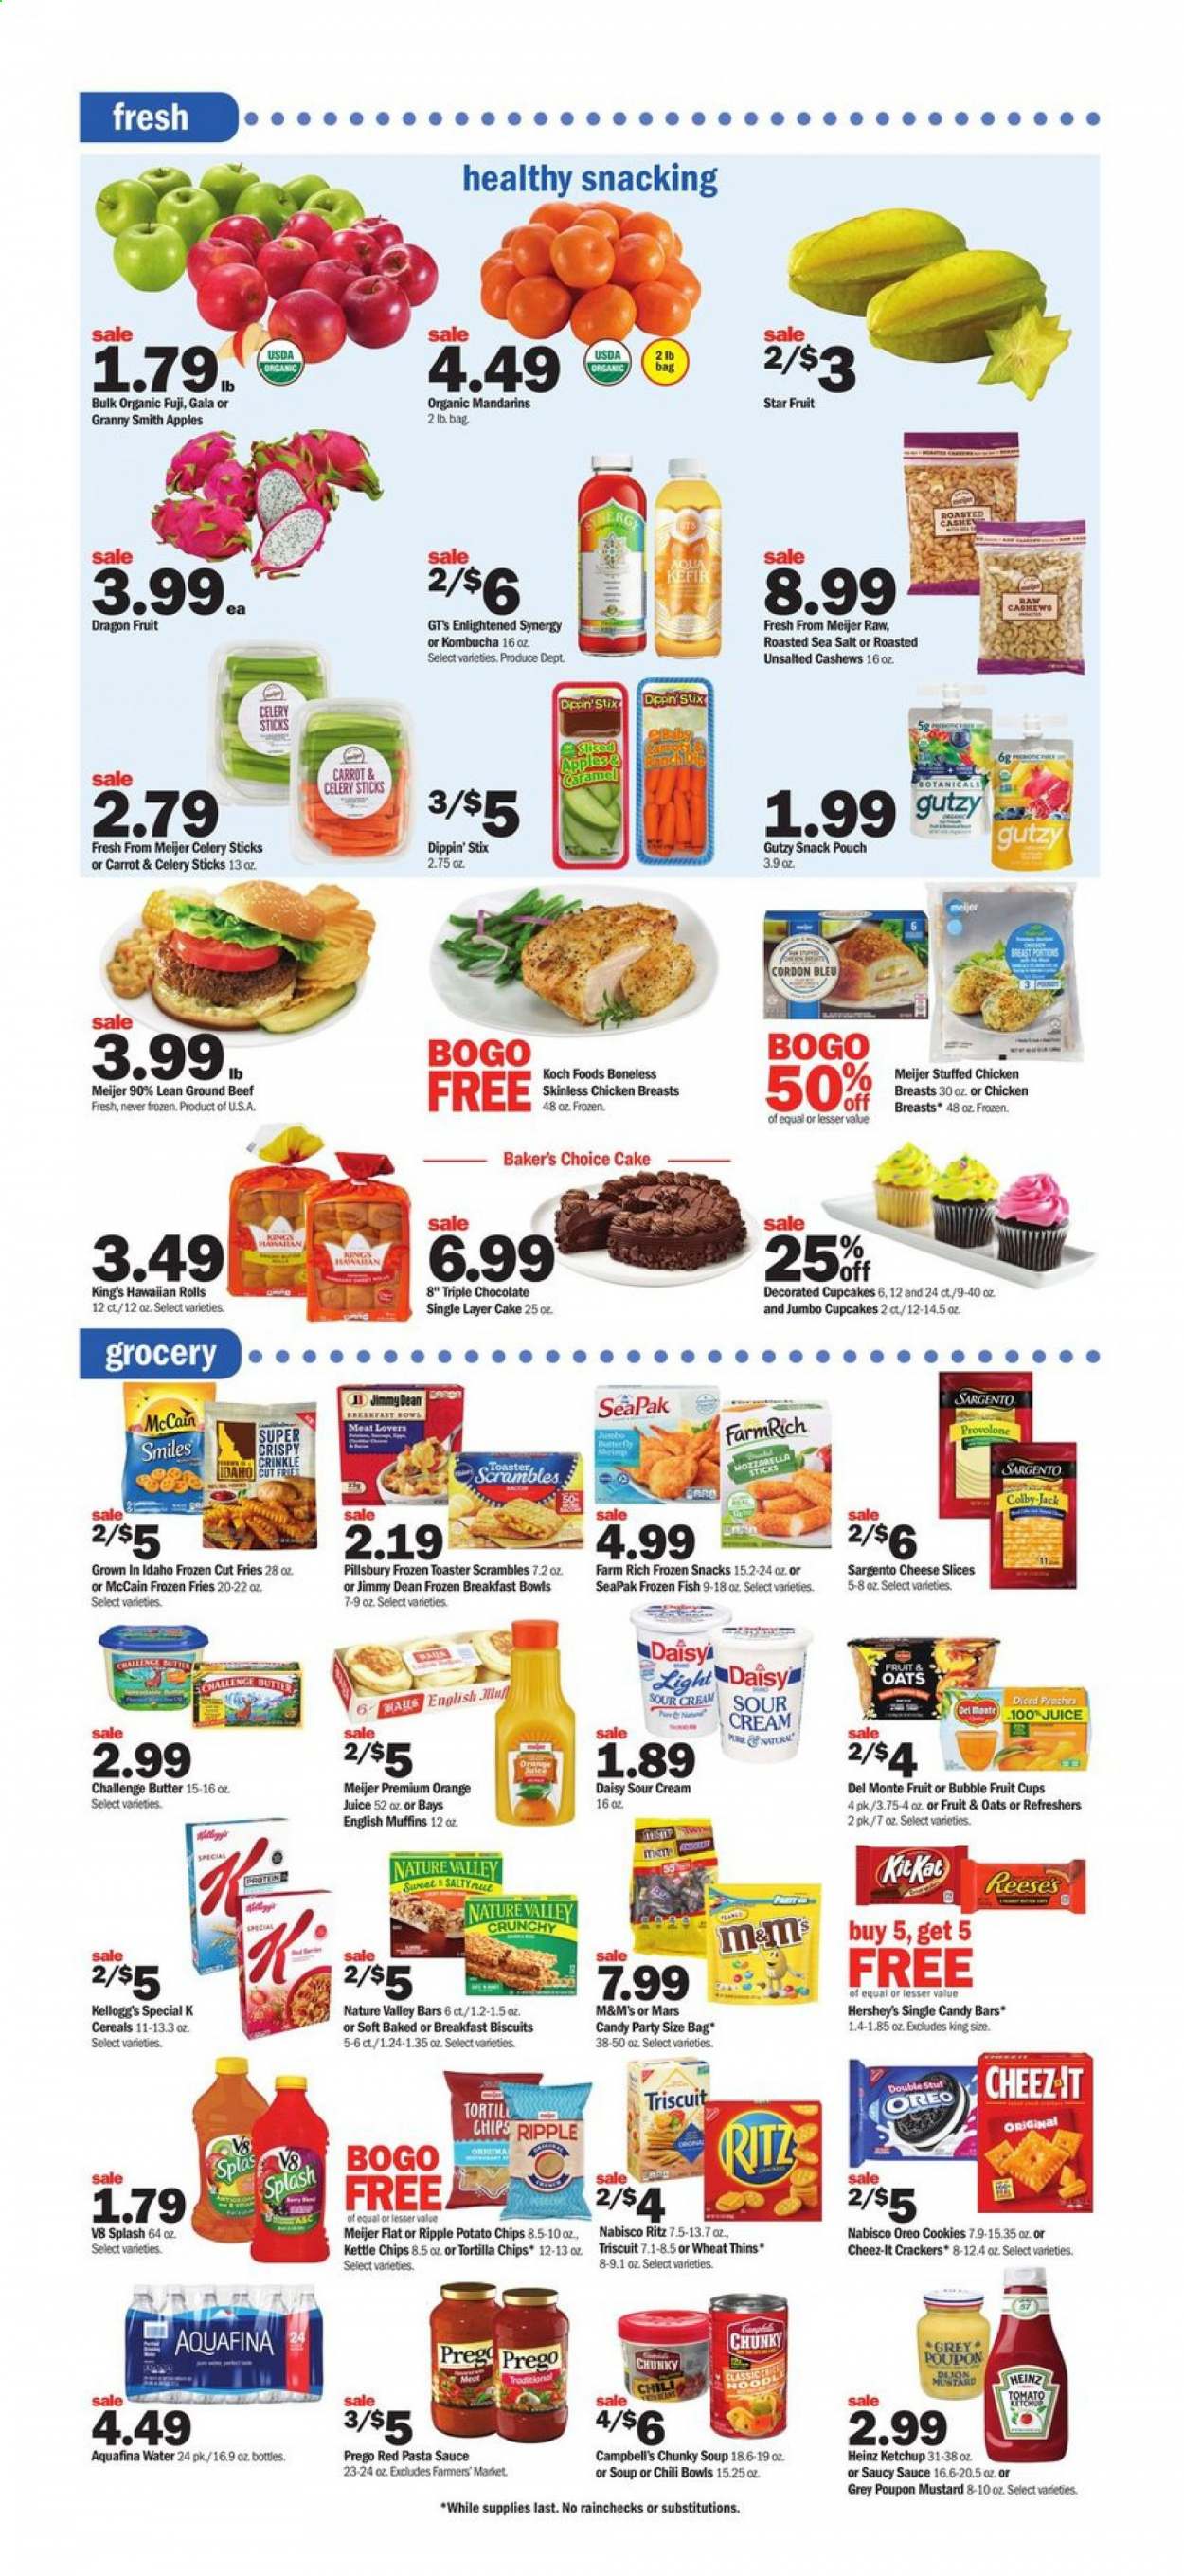 thumbnail - Meijer Flyer - 01/24/2021 - 01/30/2021 - Sales products - star fruit, fruit cup, cupcake, hawaiian rolls, cake, muffin, apples, fish, shrimps, Campbell's, english muffins, soup, sauce, Pillsbury, Jimmy Dean, stuffed chicken, Colby cheese, mozzarella, sliced cheese, cheese, Sargento, Oreo, kefir, butter, sour cream, Reese's, Hershey's, Enlightened lce Cream, celery, cordon bleu, McCain, potato fries, cookies, chocolate, Mars, M&M's, crackers, Kellogg's, biscuit, RITZ, tortilla chips, potato chips, snack, Thins, Cheez-It, oats, sea salt, mandarines, Heinz, cereals, Nature Valley, noodles, caramel, mustard, ketchup, pasta sauce, cashews, orange juice, juice, Aquafina, kombucha, chicken breasts, beef meat, ground beef, bowl, toaster, bag. Page 3.